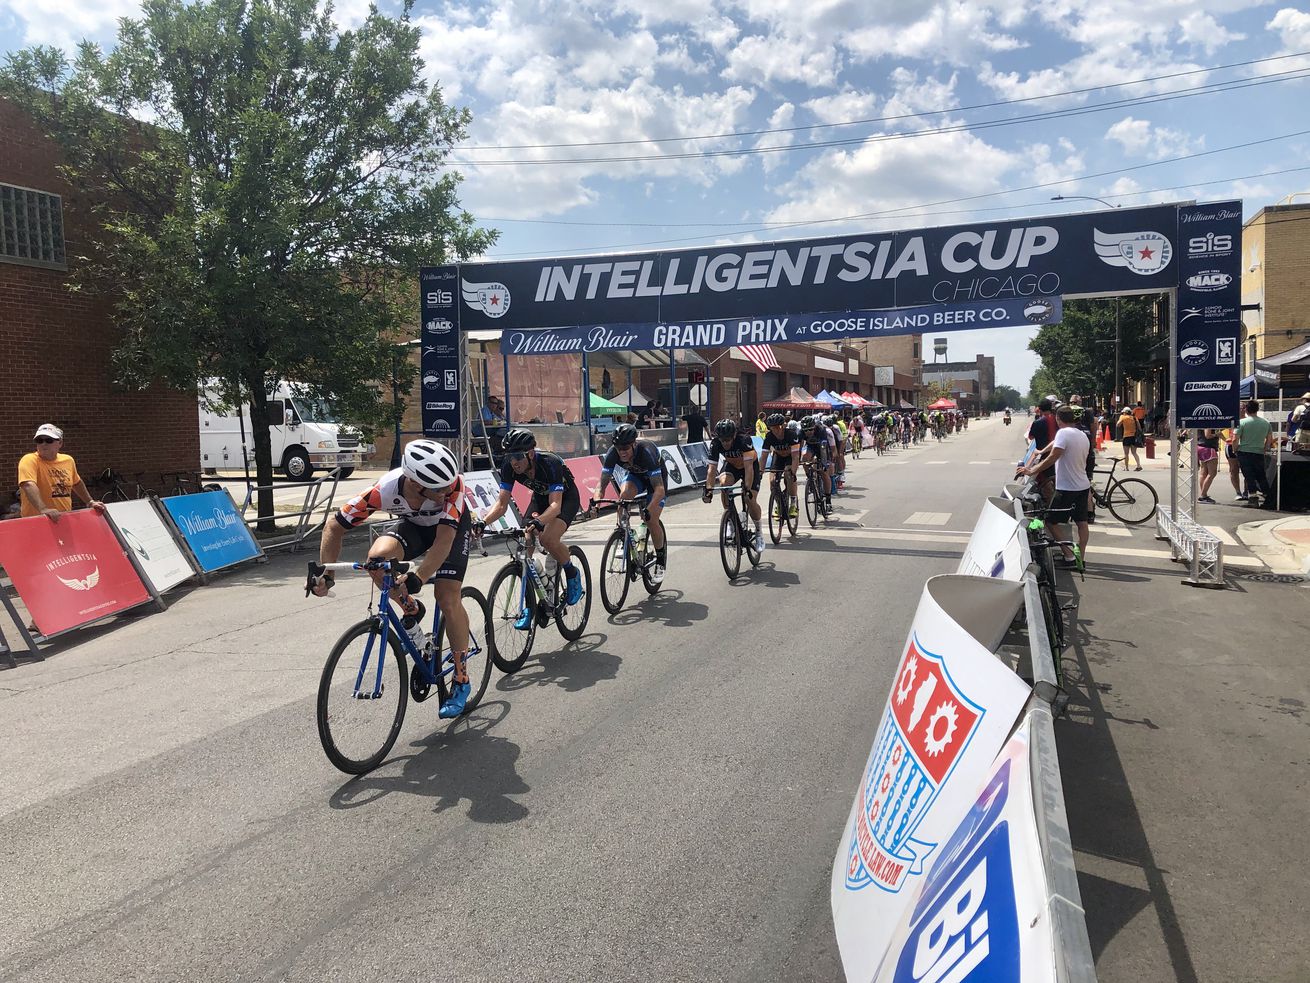 Cyclists compete in the Intelligentsia Cup.